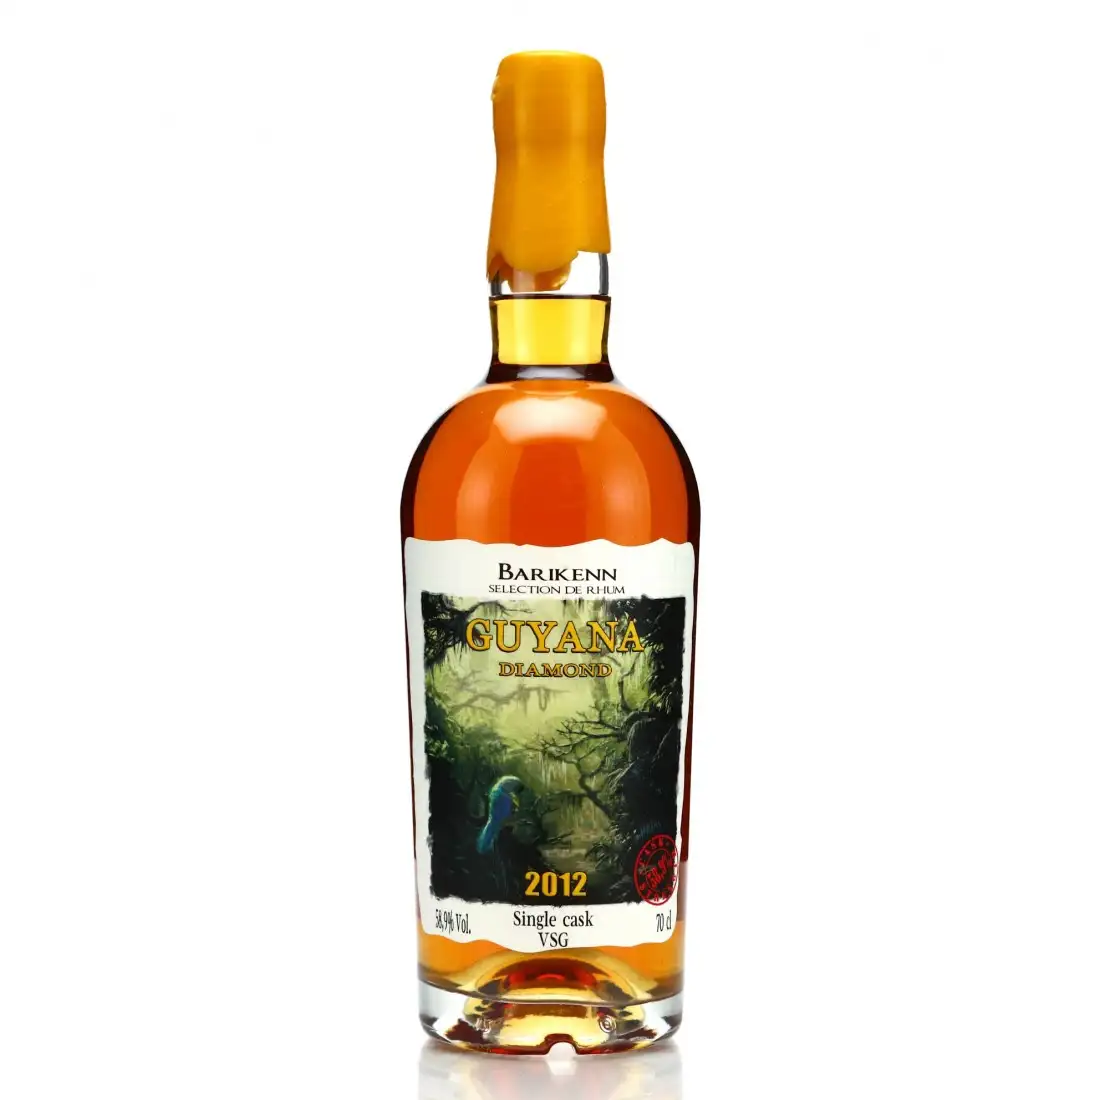 Image of the front of the bottle of the rum Guyana Diamond VSG